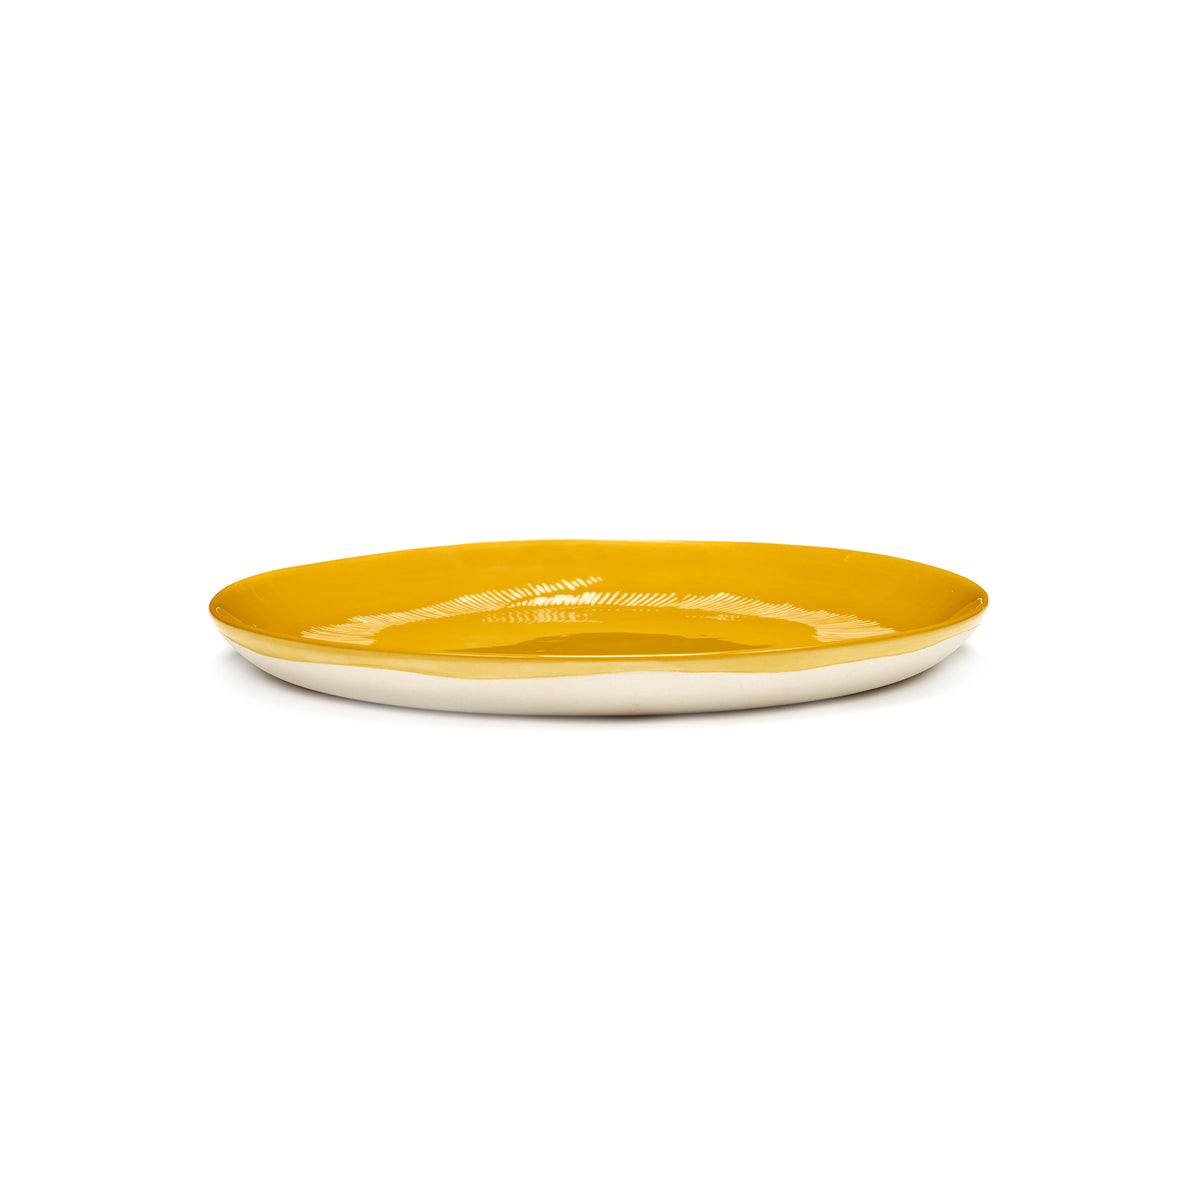 Sunny Yellow Plate with White Stripes - S